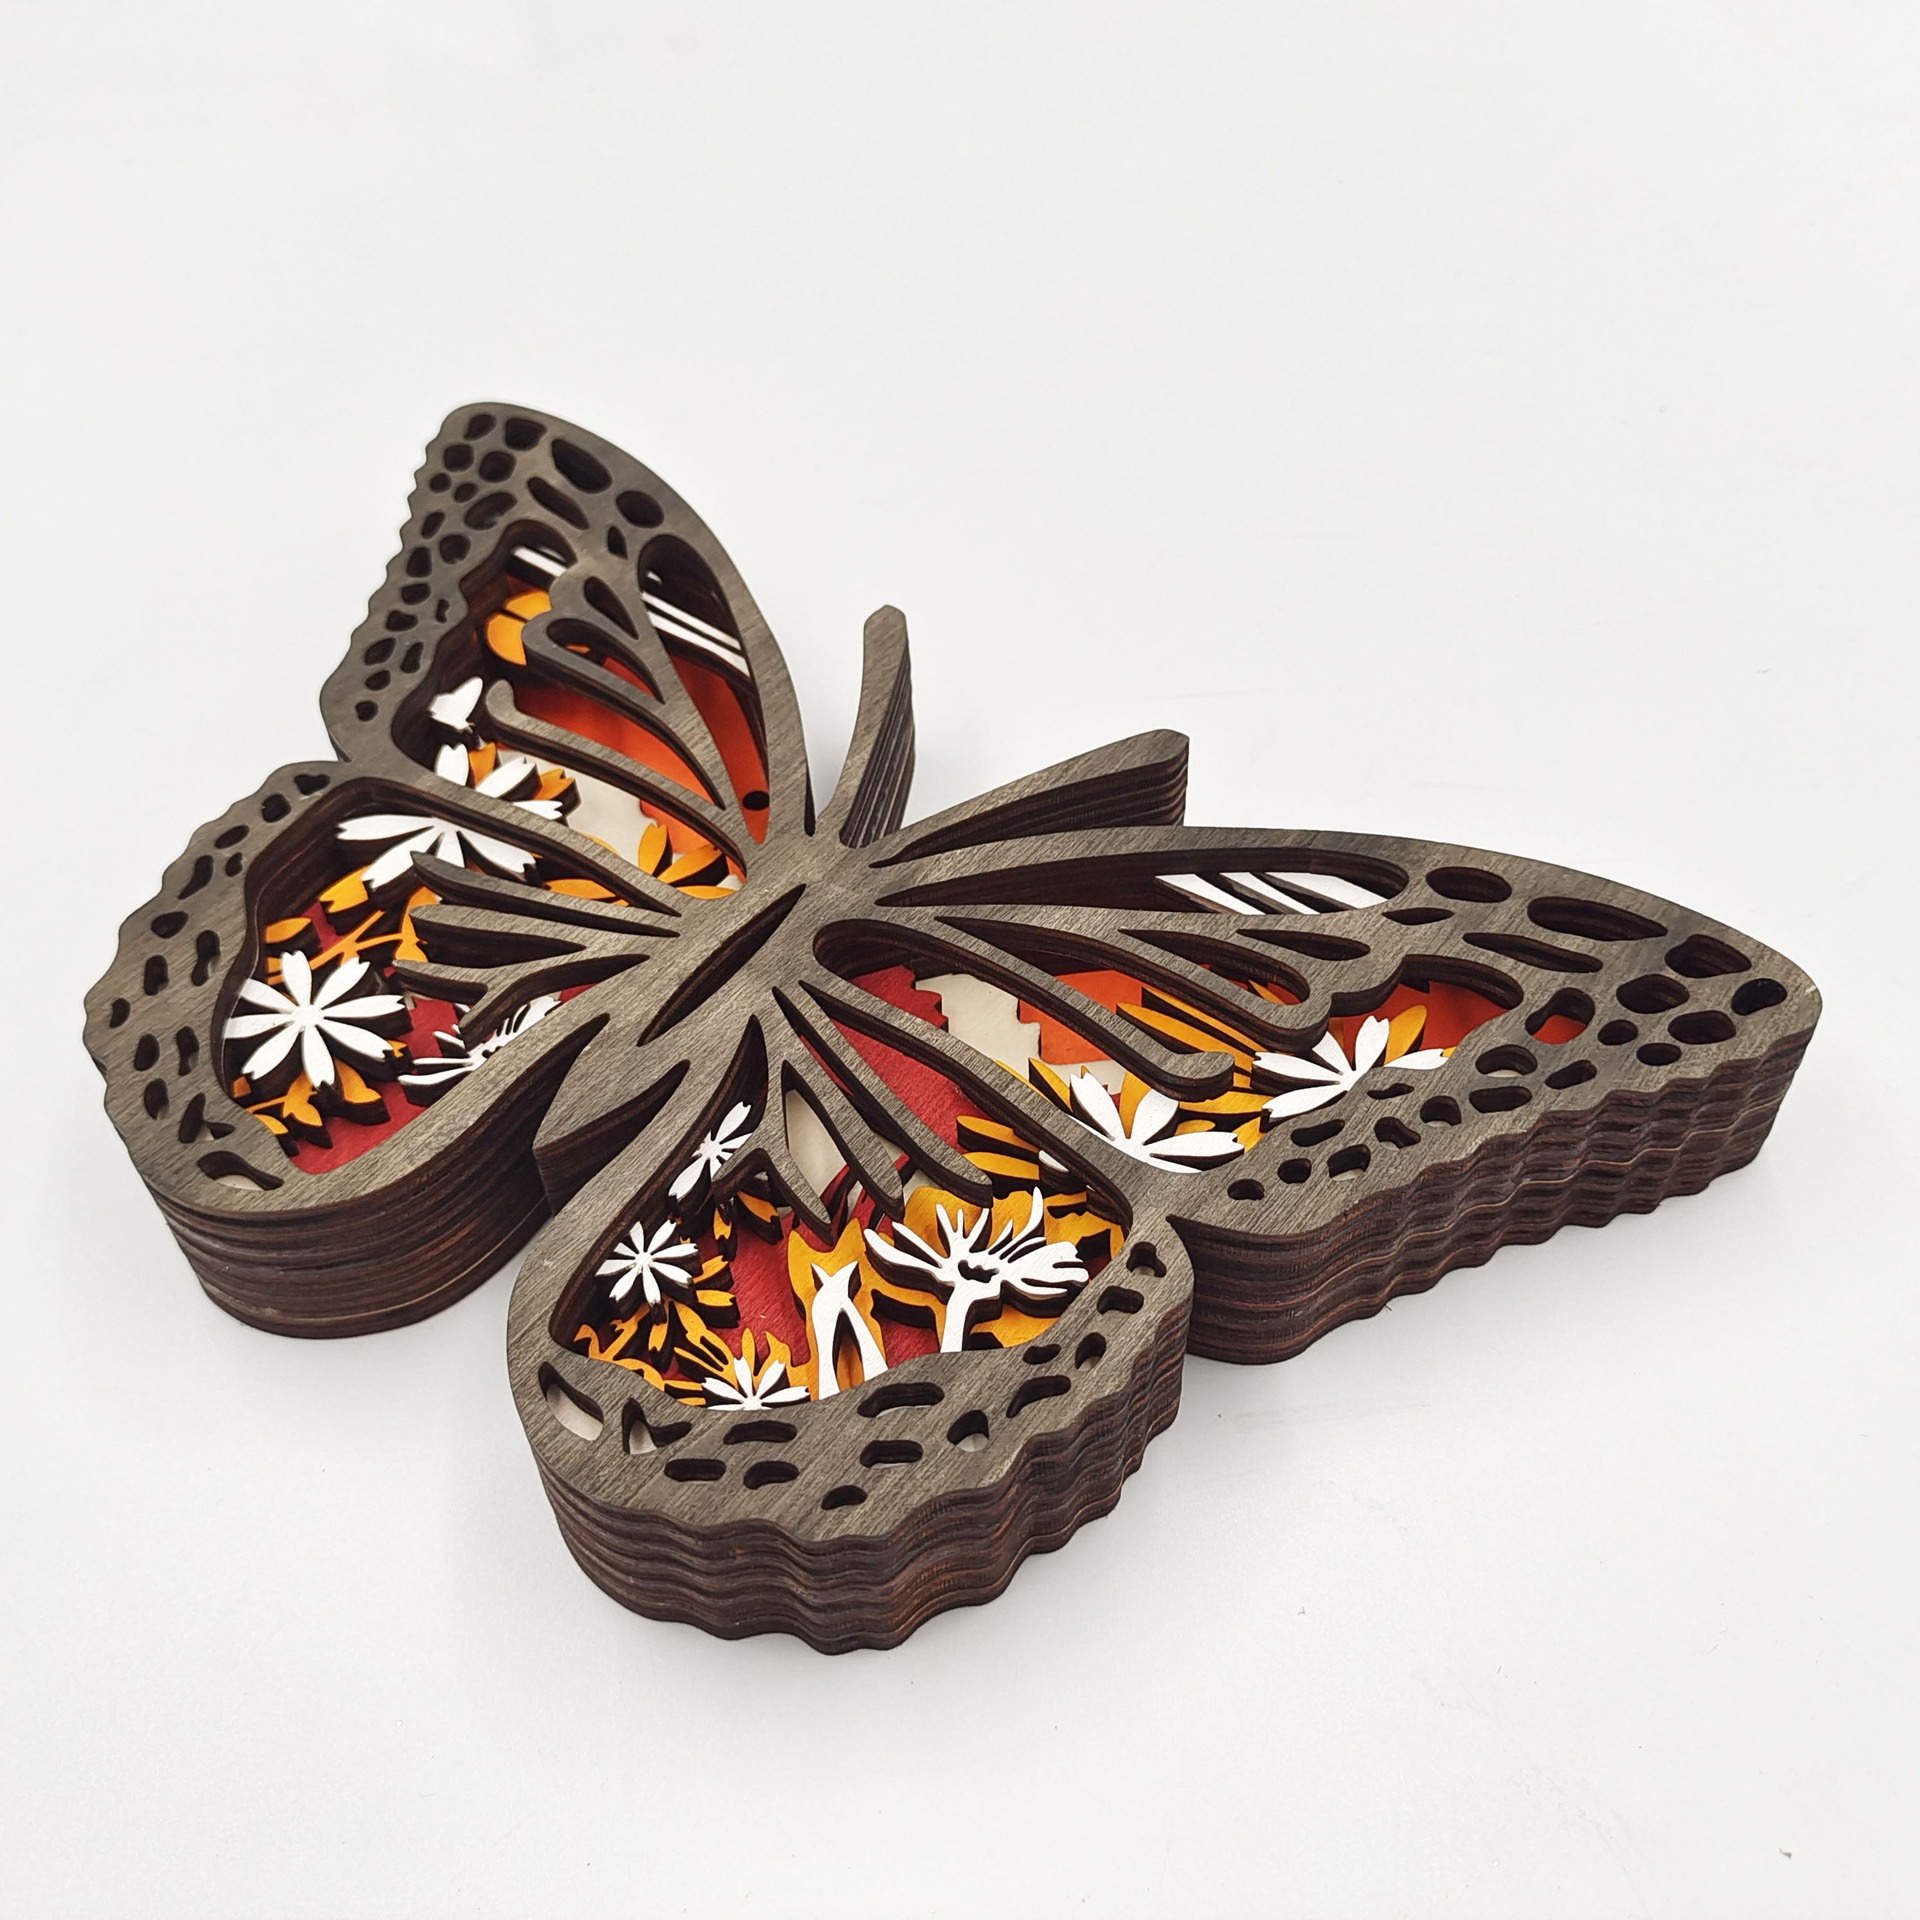 New Arrivals✨- New Hollow Out Butterfly Creative Animal Home Lamp Decorative Wood Ornaments